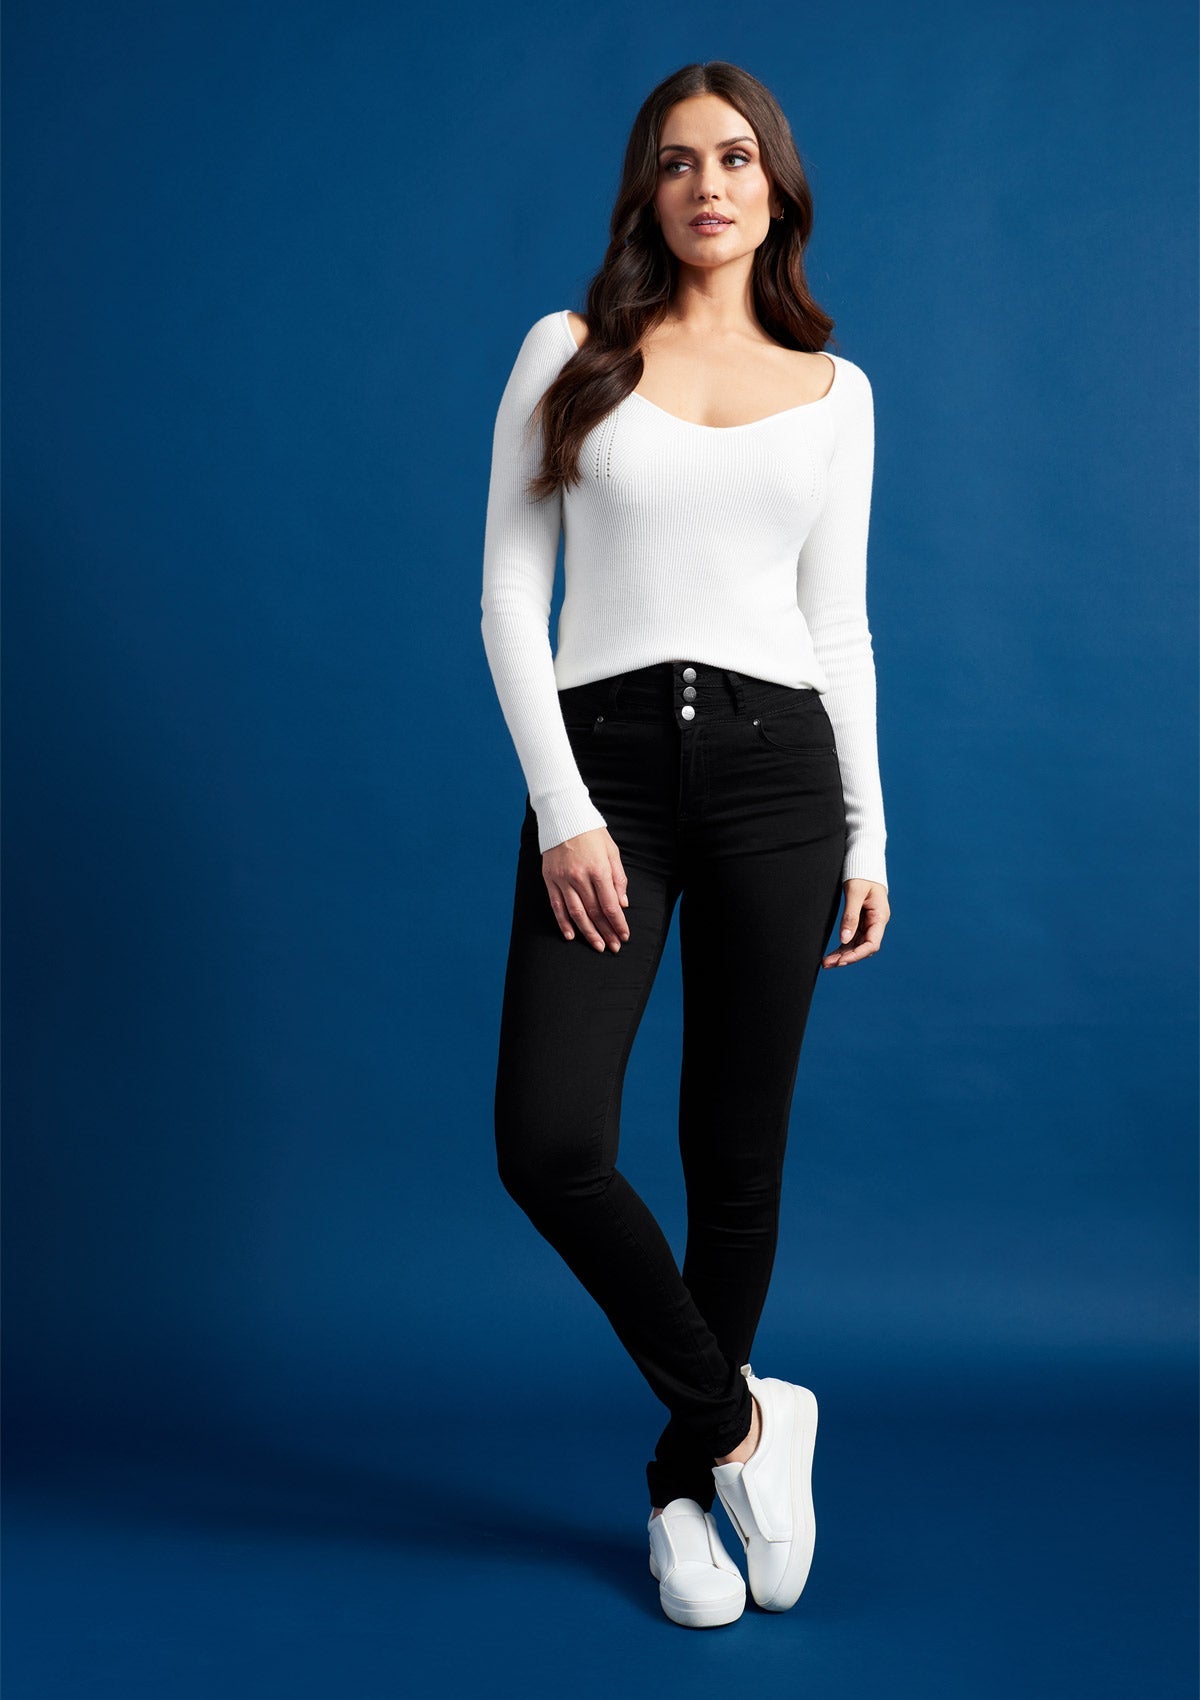 Jeans for Tall Women - Alloy Apparel